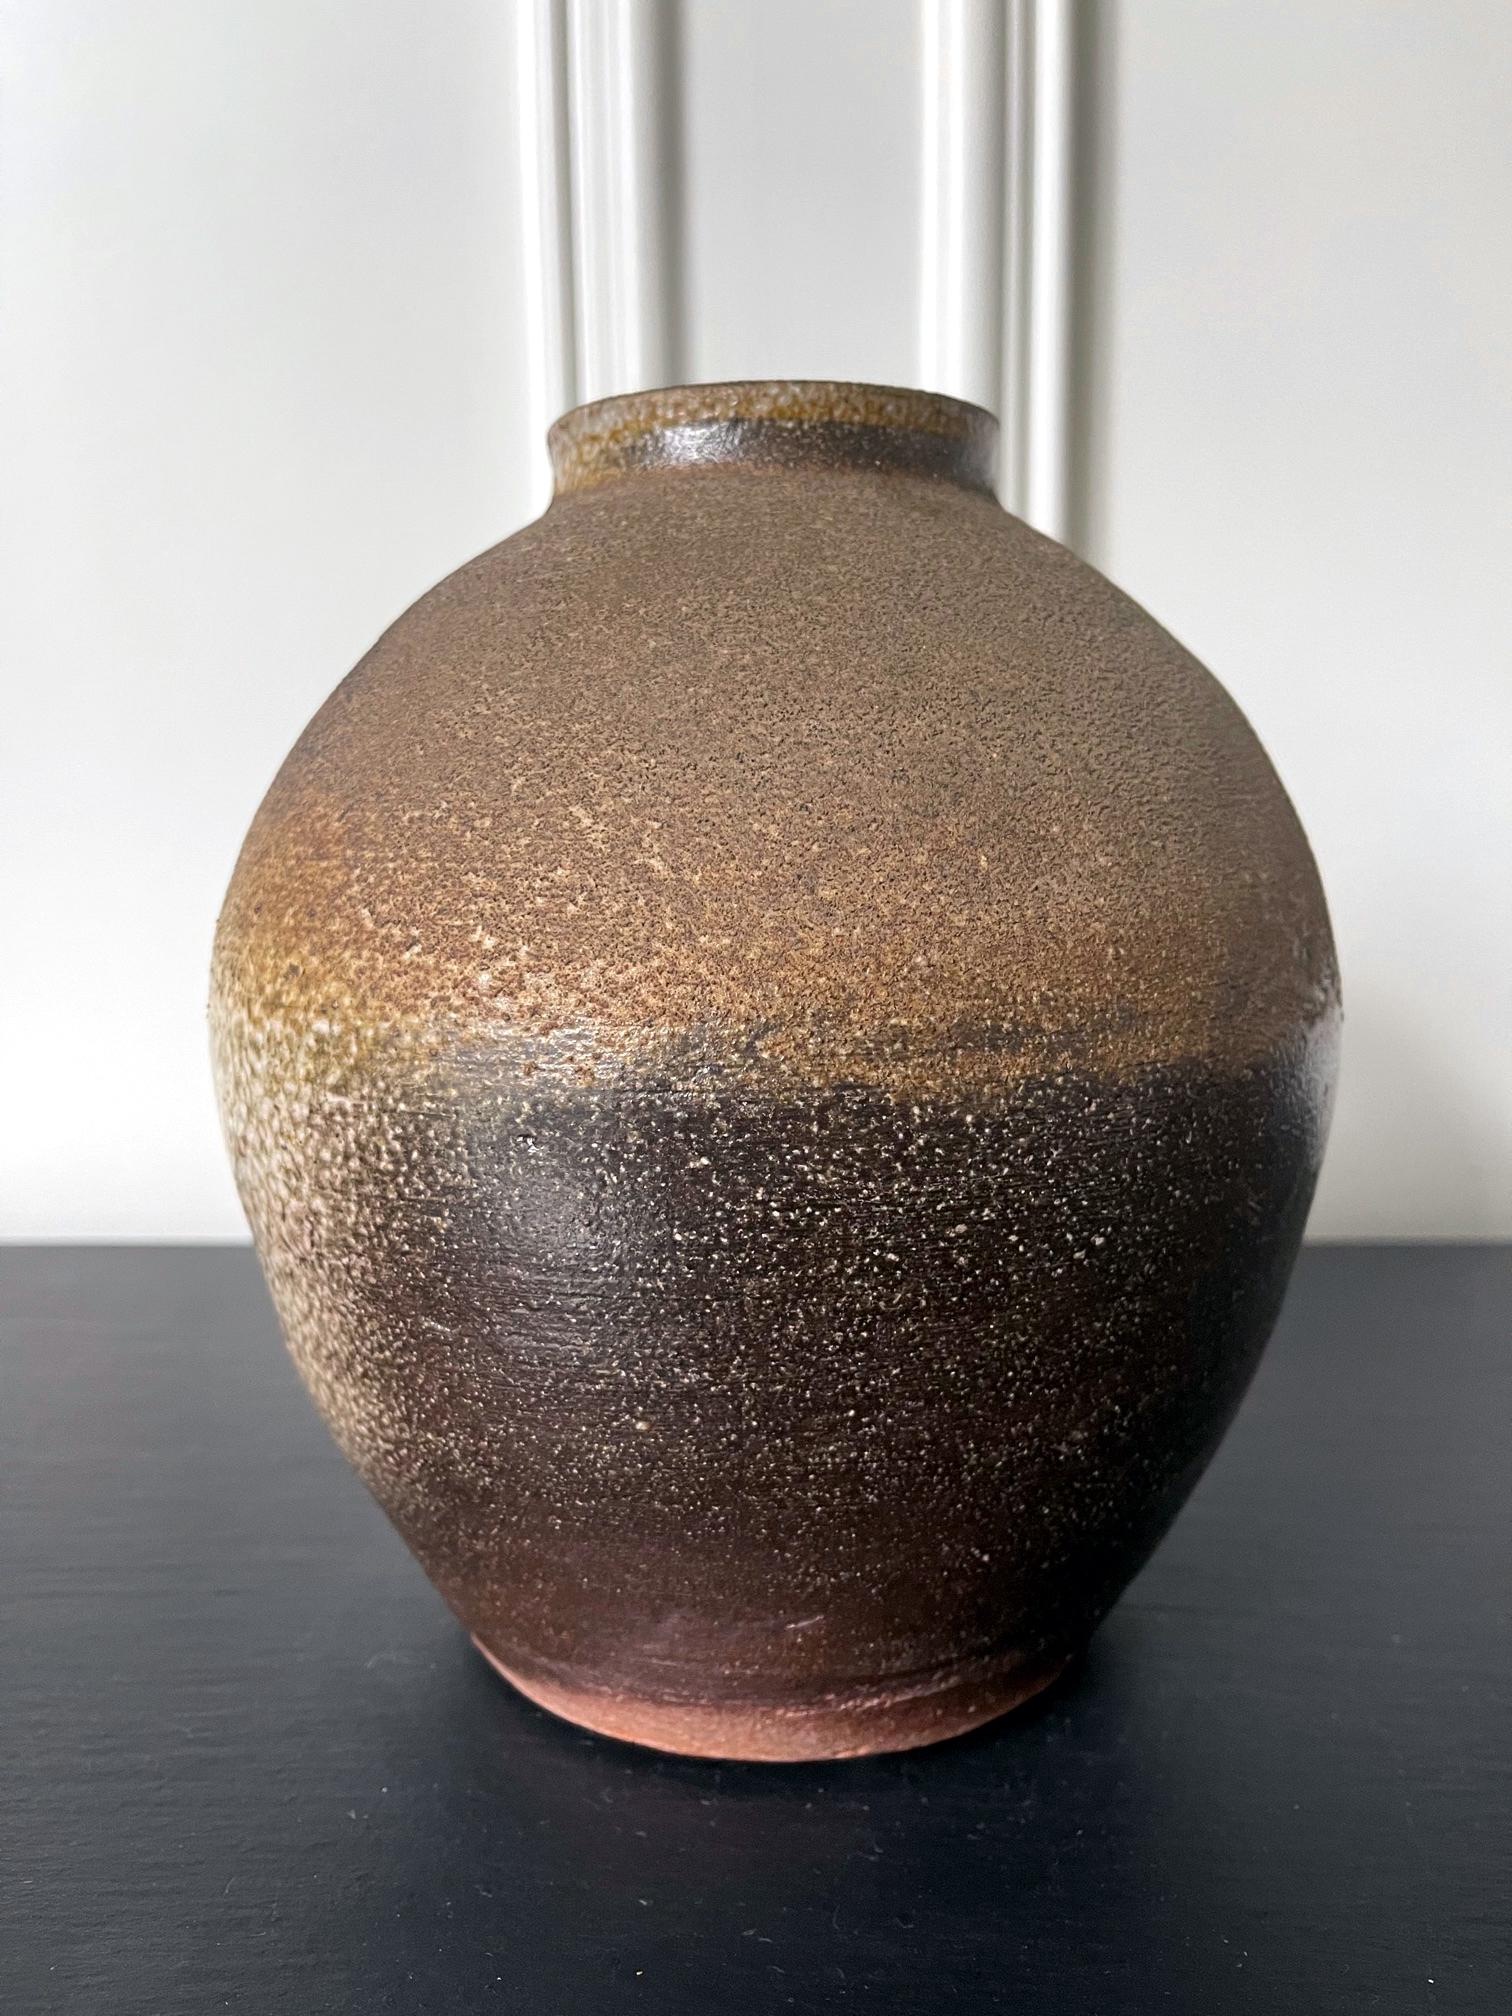 A Shigaraki stoneware jar by Japanese potter Shino Kanzaki (1942-2018). Kanzaki is a world renowned potter in Shigaraki who based his modern work on the ancient tradition of Shigaraki and Iga ware by firing his pieces in anagama kiln (underground